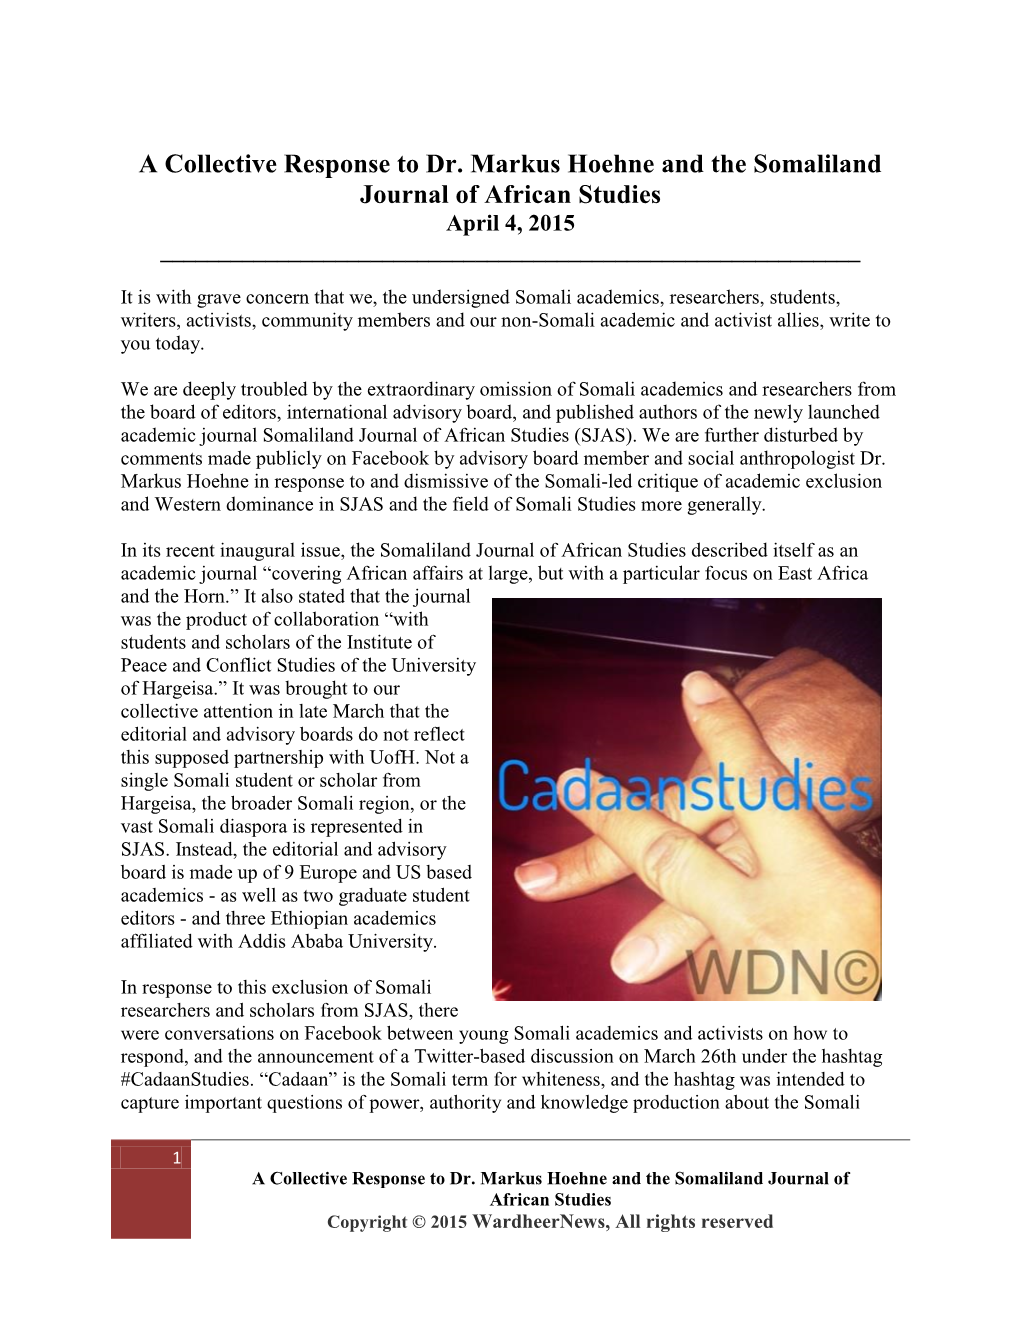 A Collective Response to Dr. Markus Hoehne and the Somaliland Journal of African Studies April 4, 2015 ______